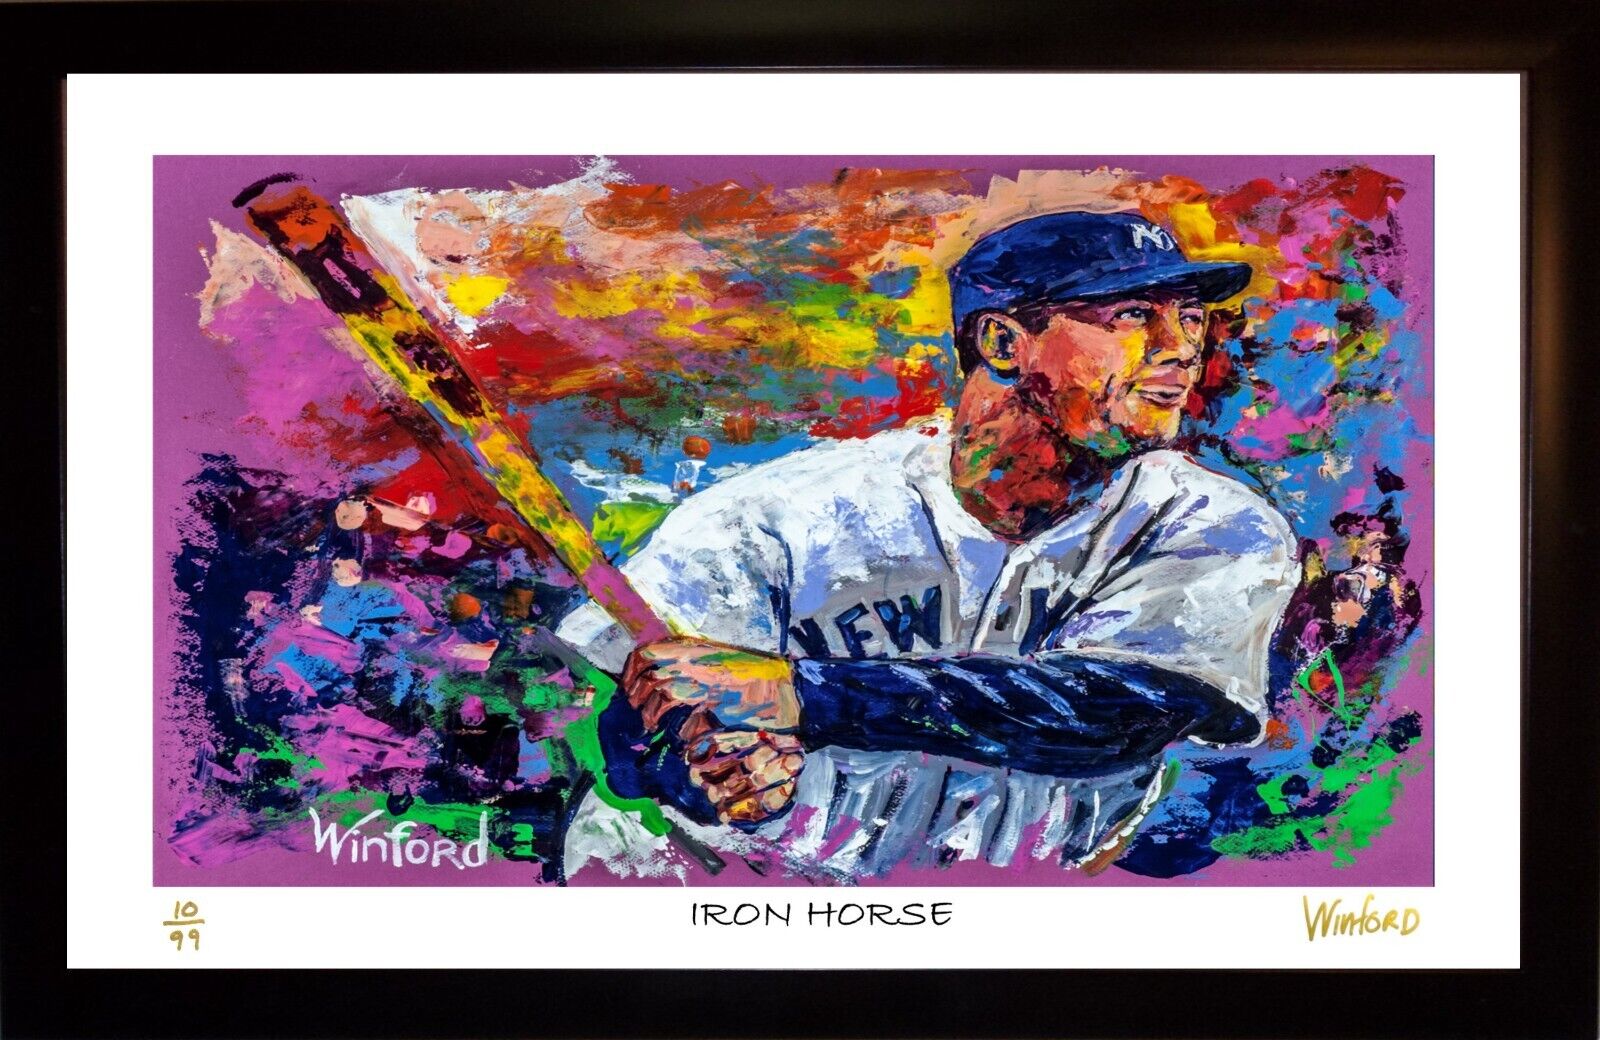 Sale LOU GEHRIG L.E. Premium Art Print, By Winford Was 199.95 Now 149.95